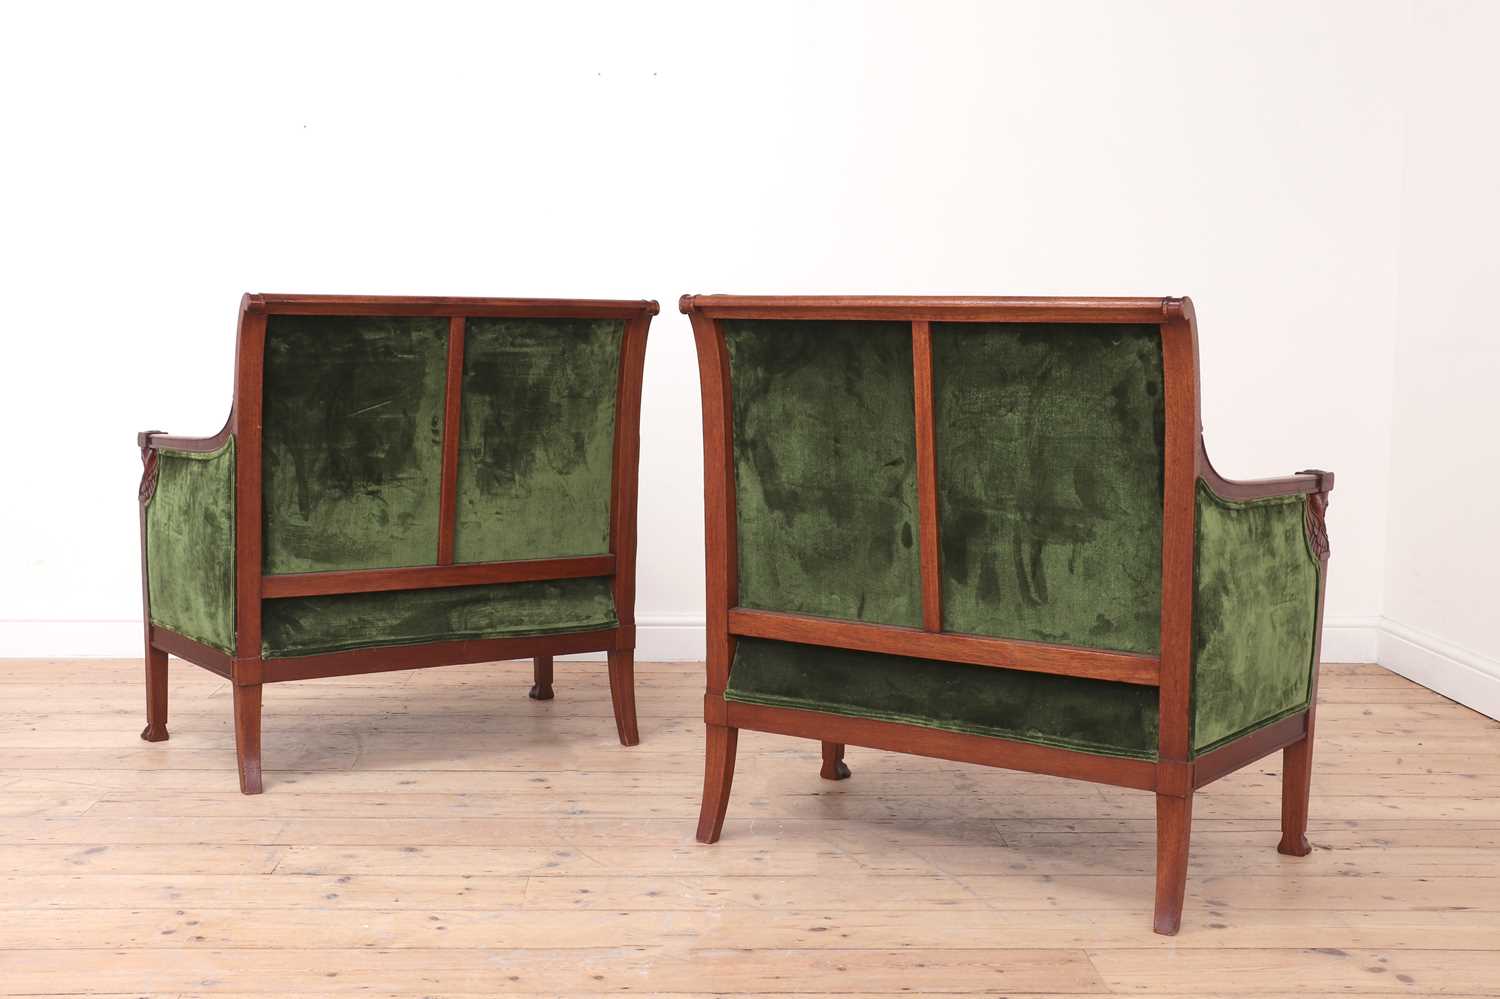 A pair of Egyptian Revival mahogany marquise chairs, - Image 5 of 6